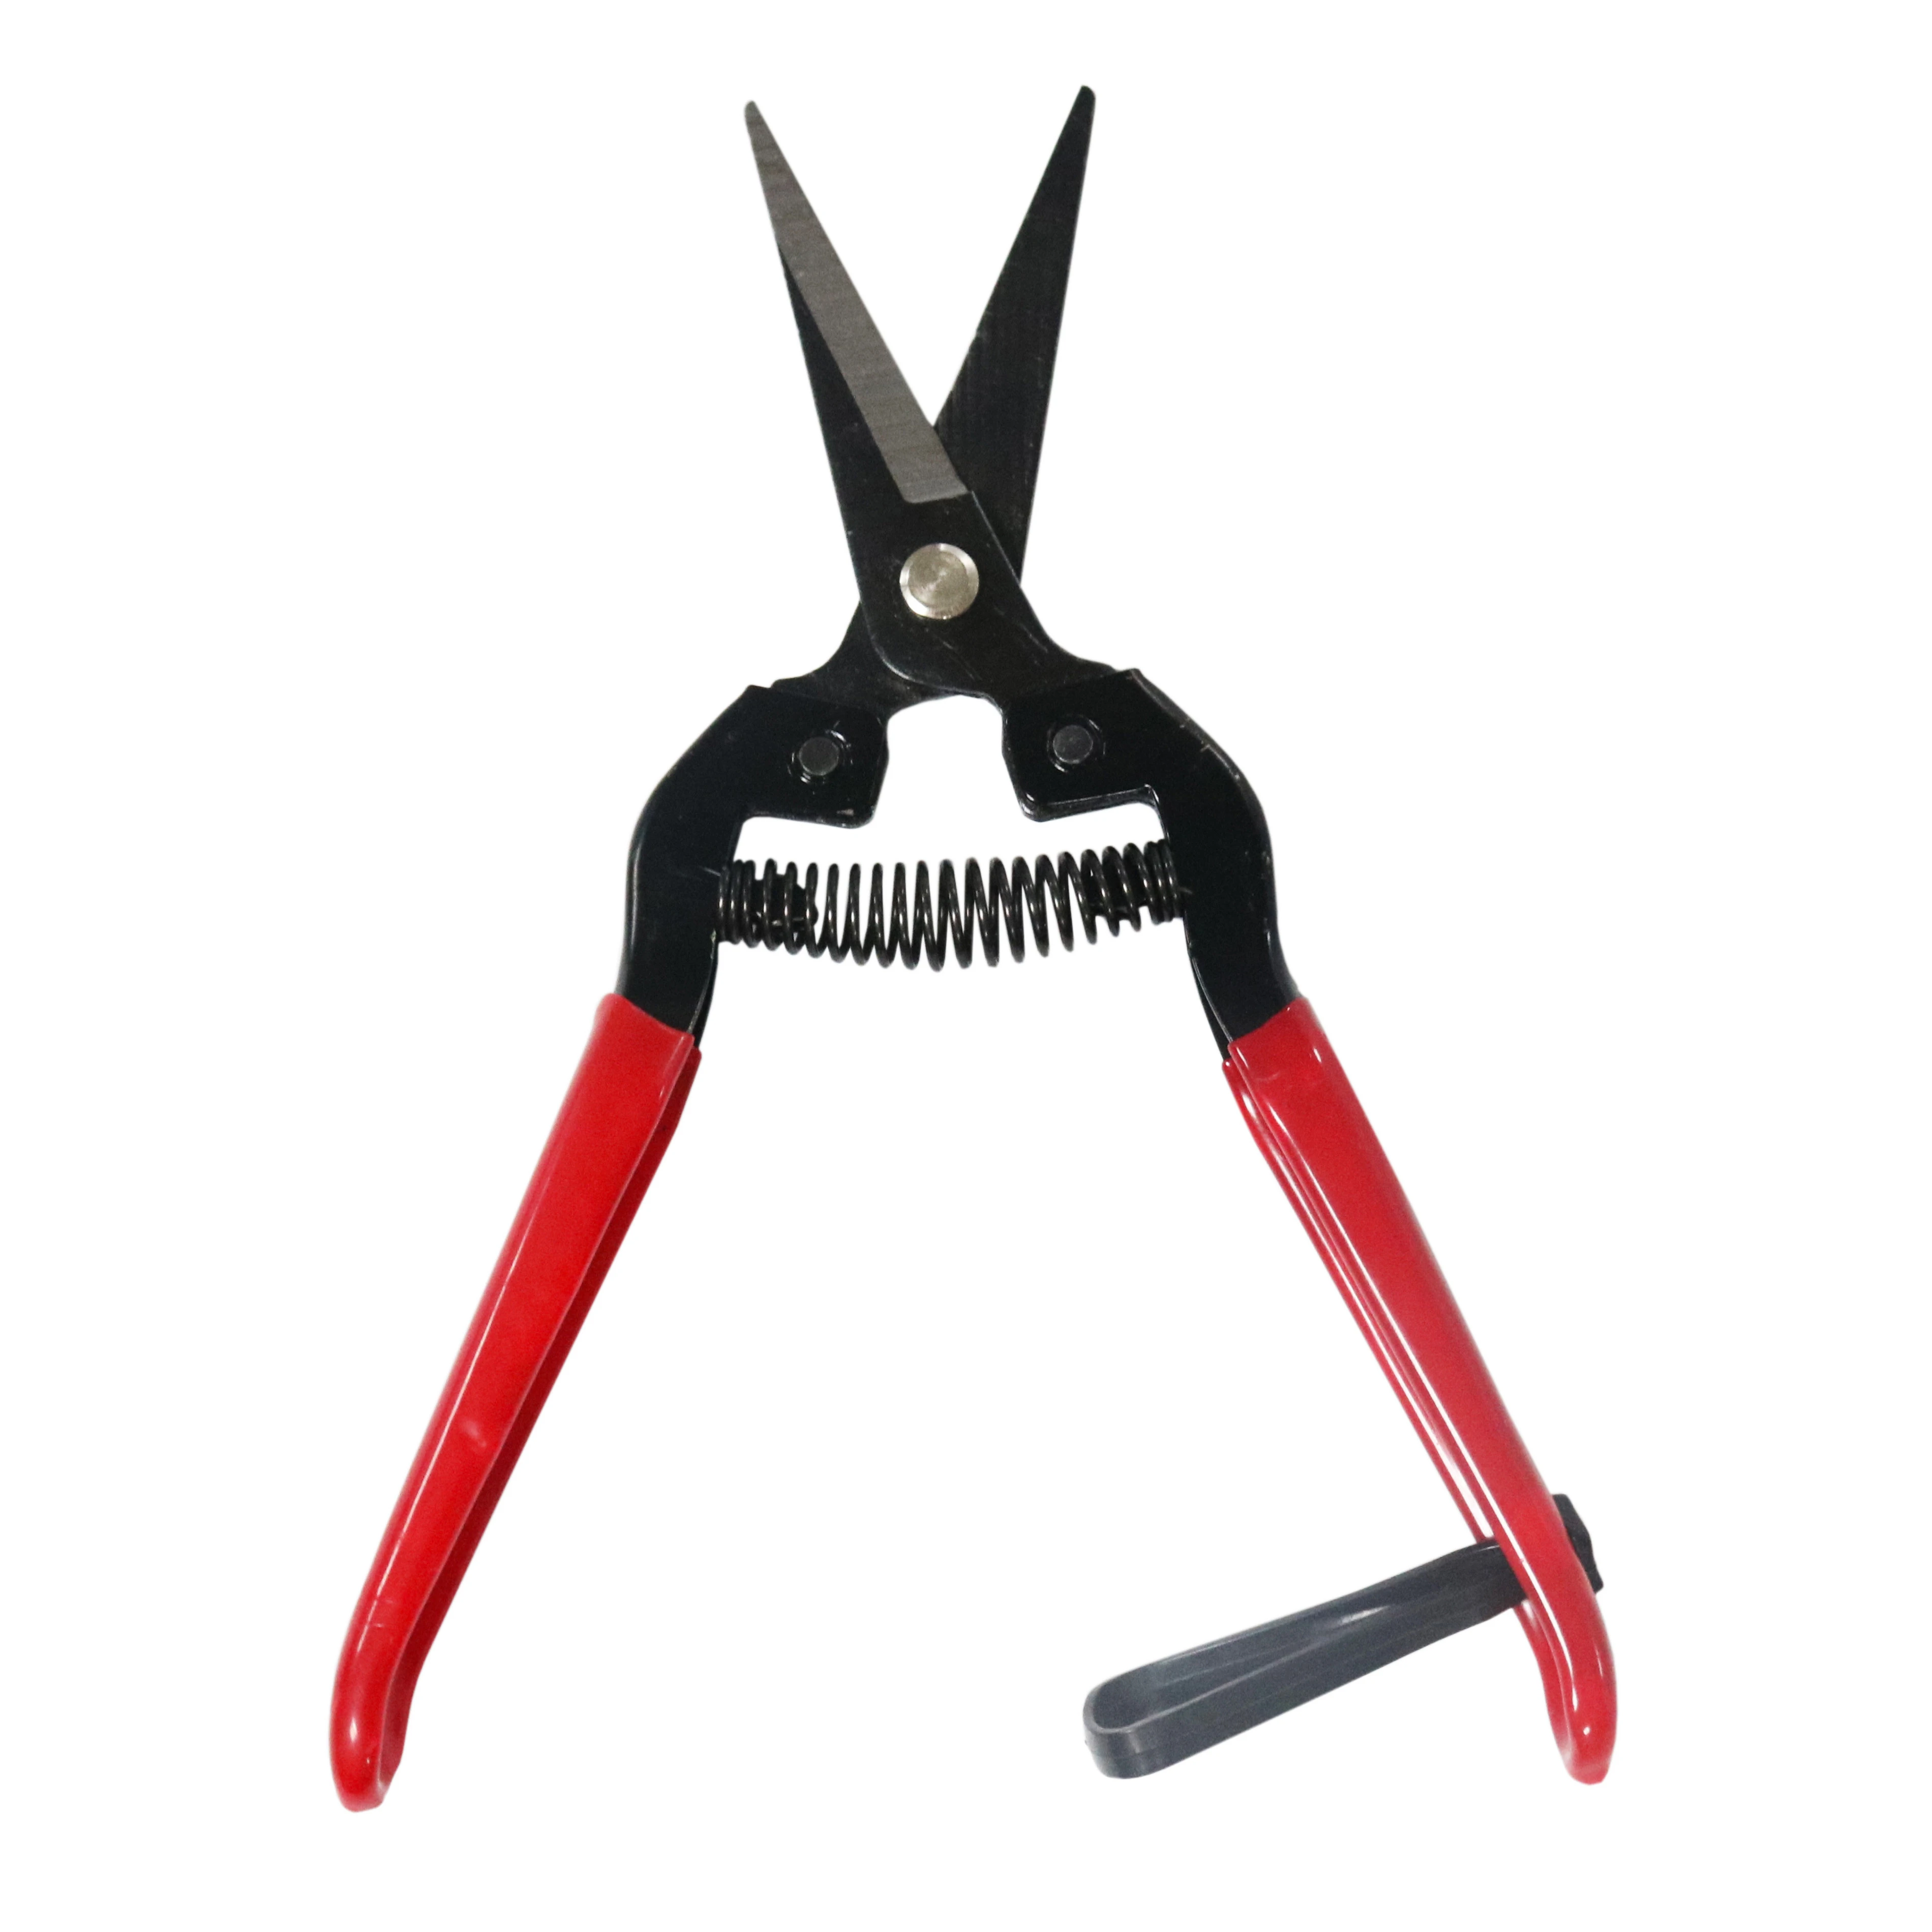 Professional Sharp Bypass, Pruning Shears Tree Trimmers Secateurs,Hand Pruner, Clippers for The Garden